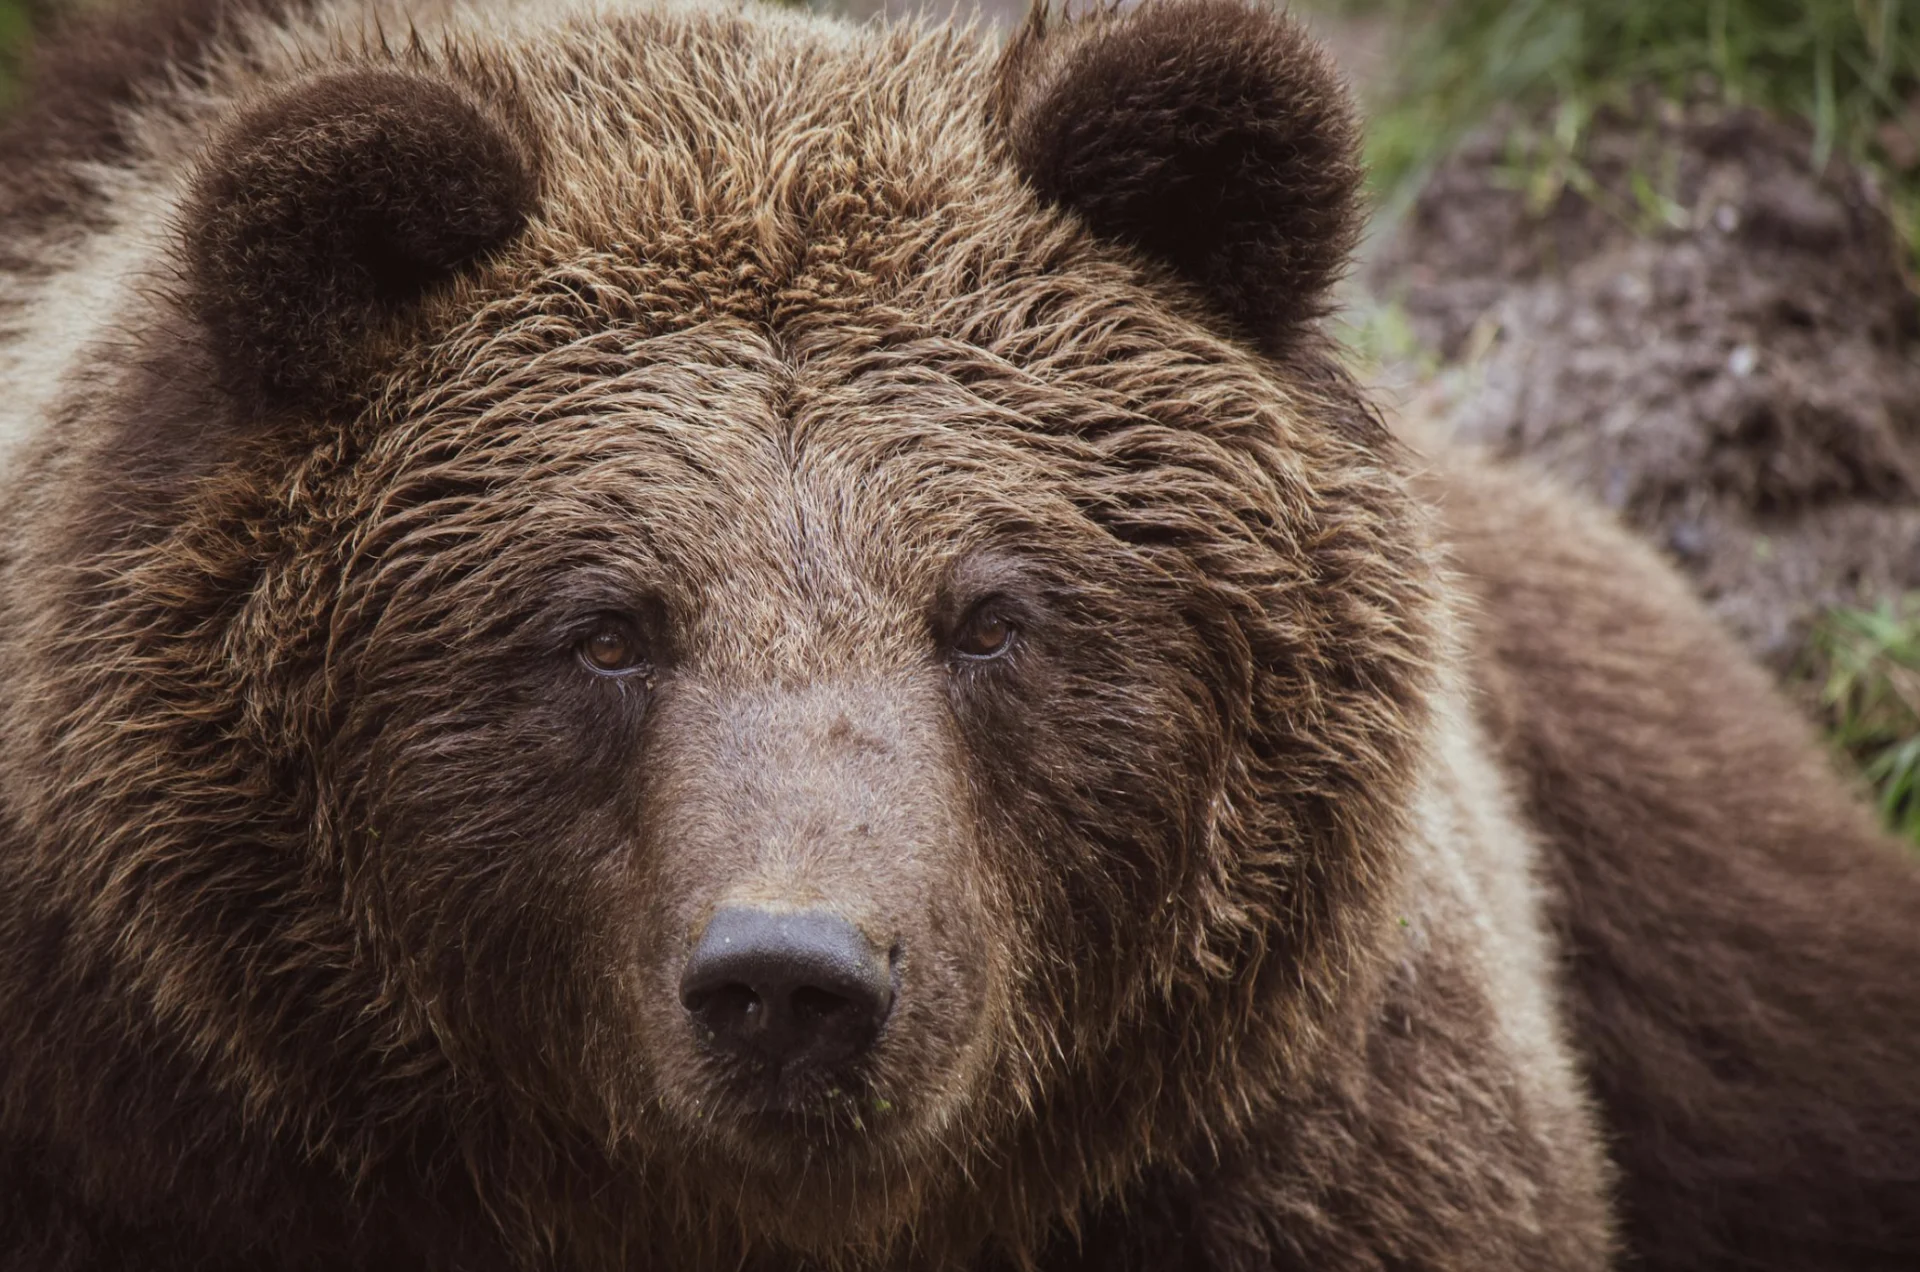 How to safely coexist with grizzlies as encounters increase in Canada